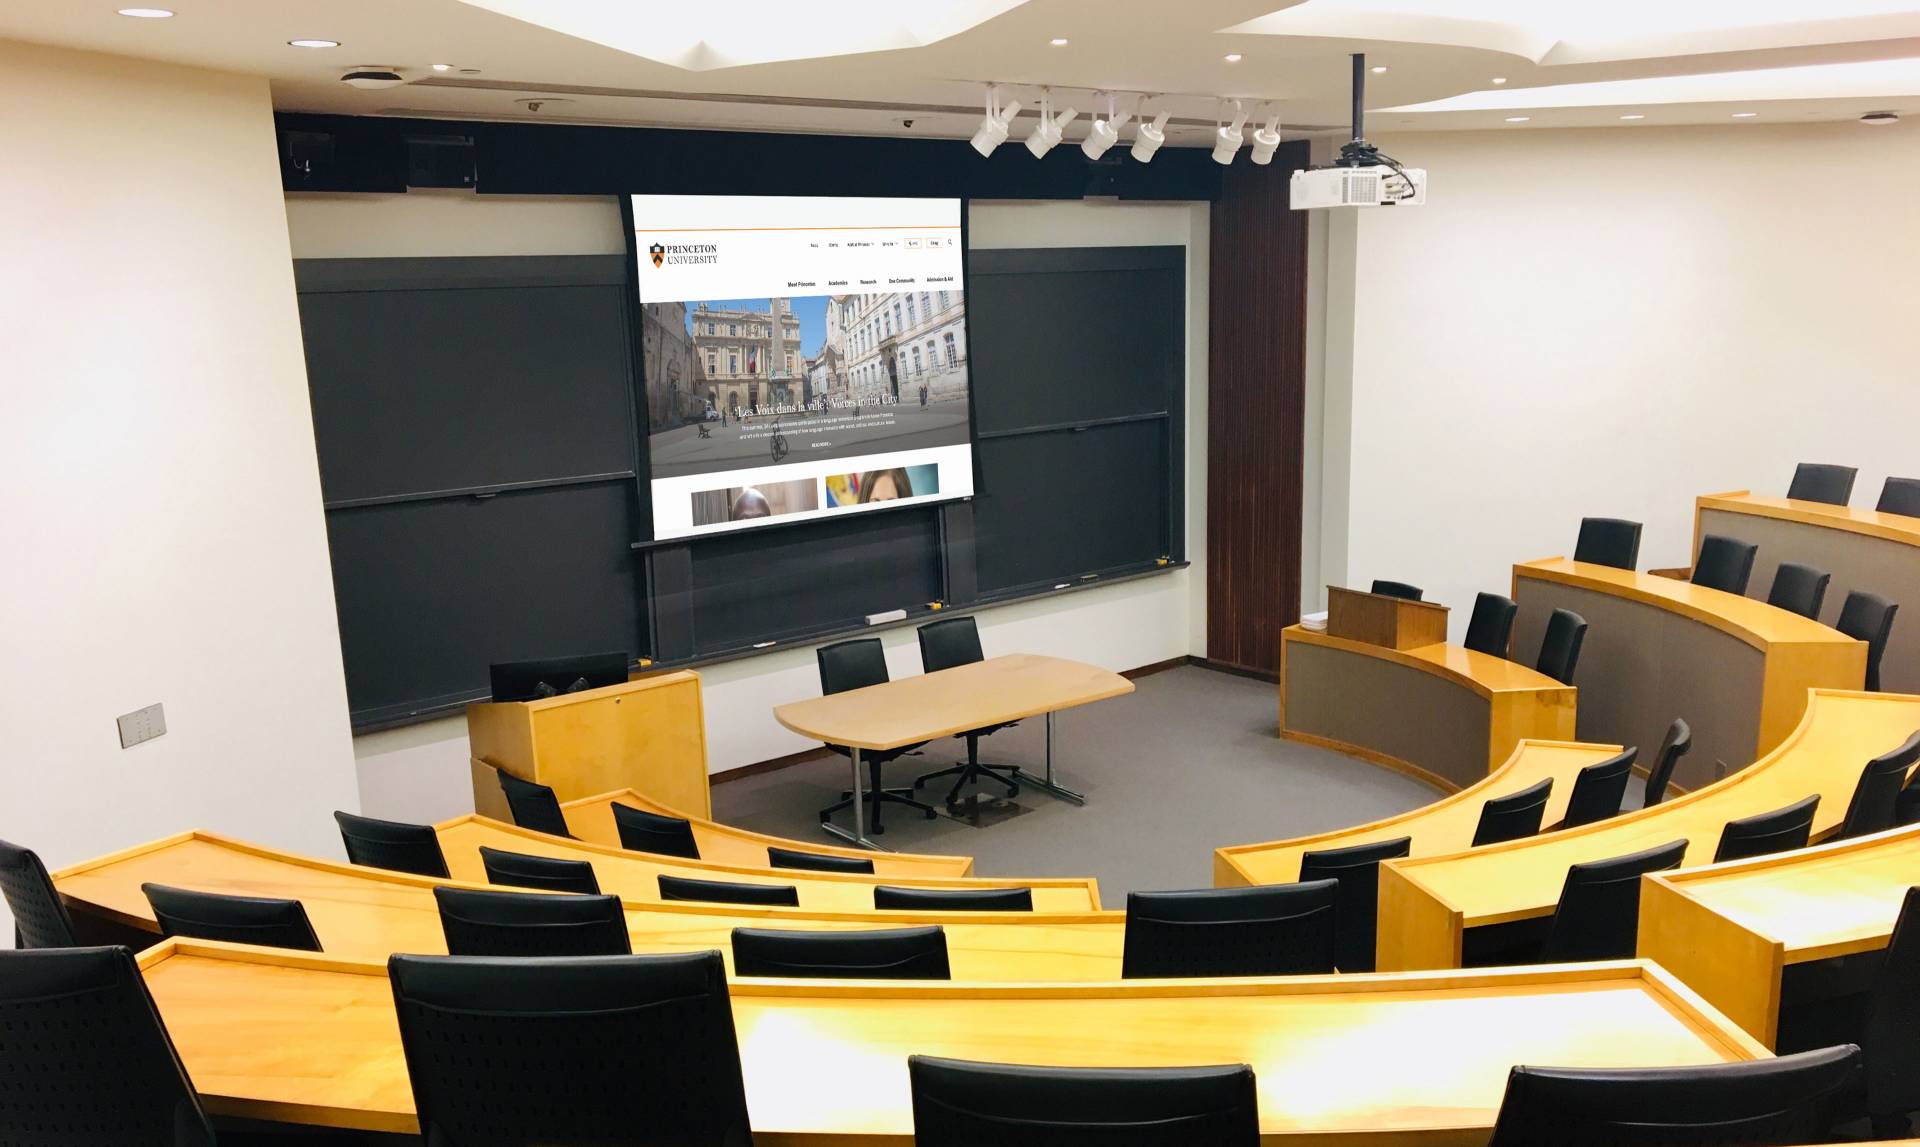 Large empty classroom with projector screen